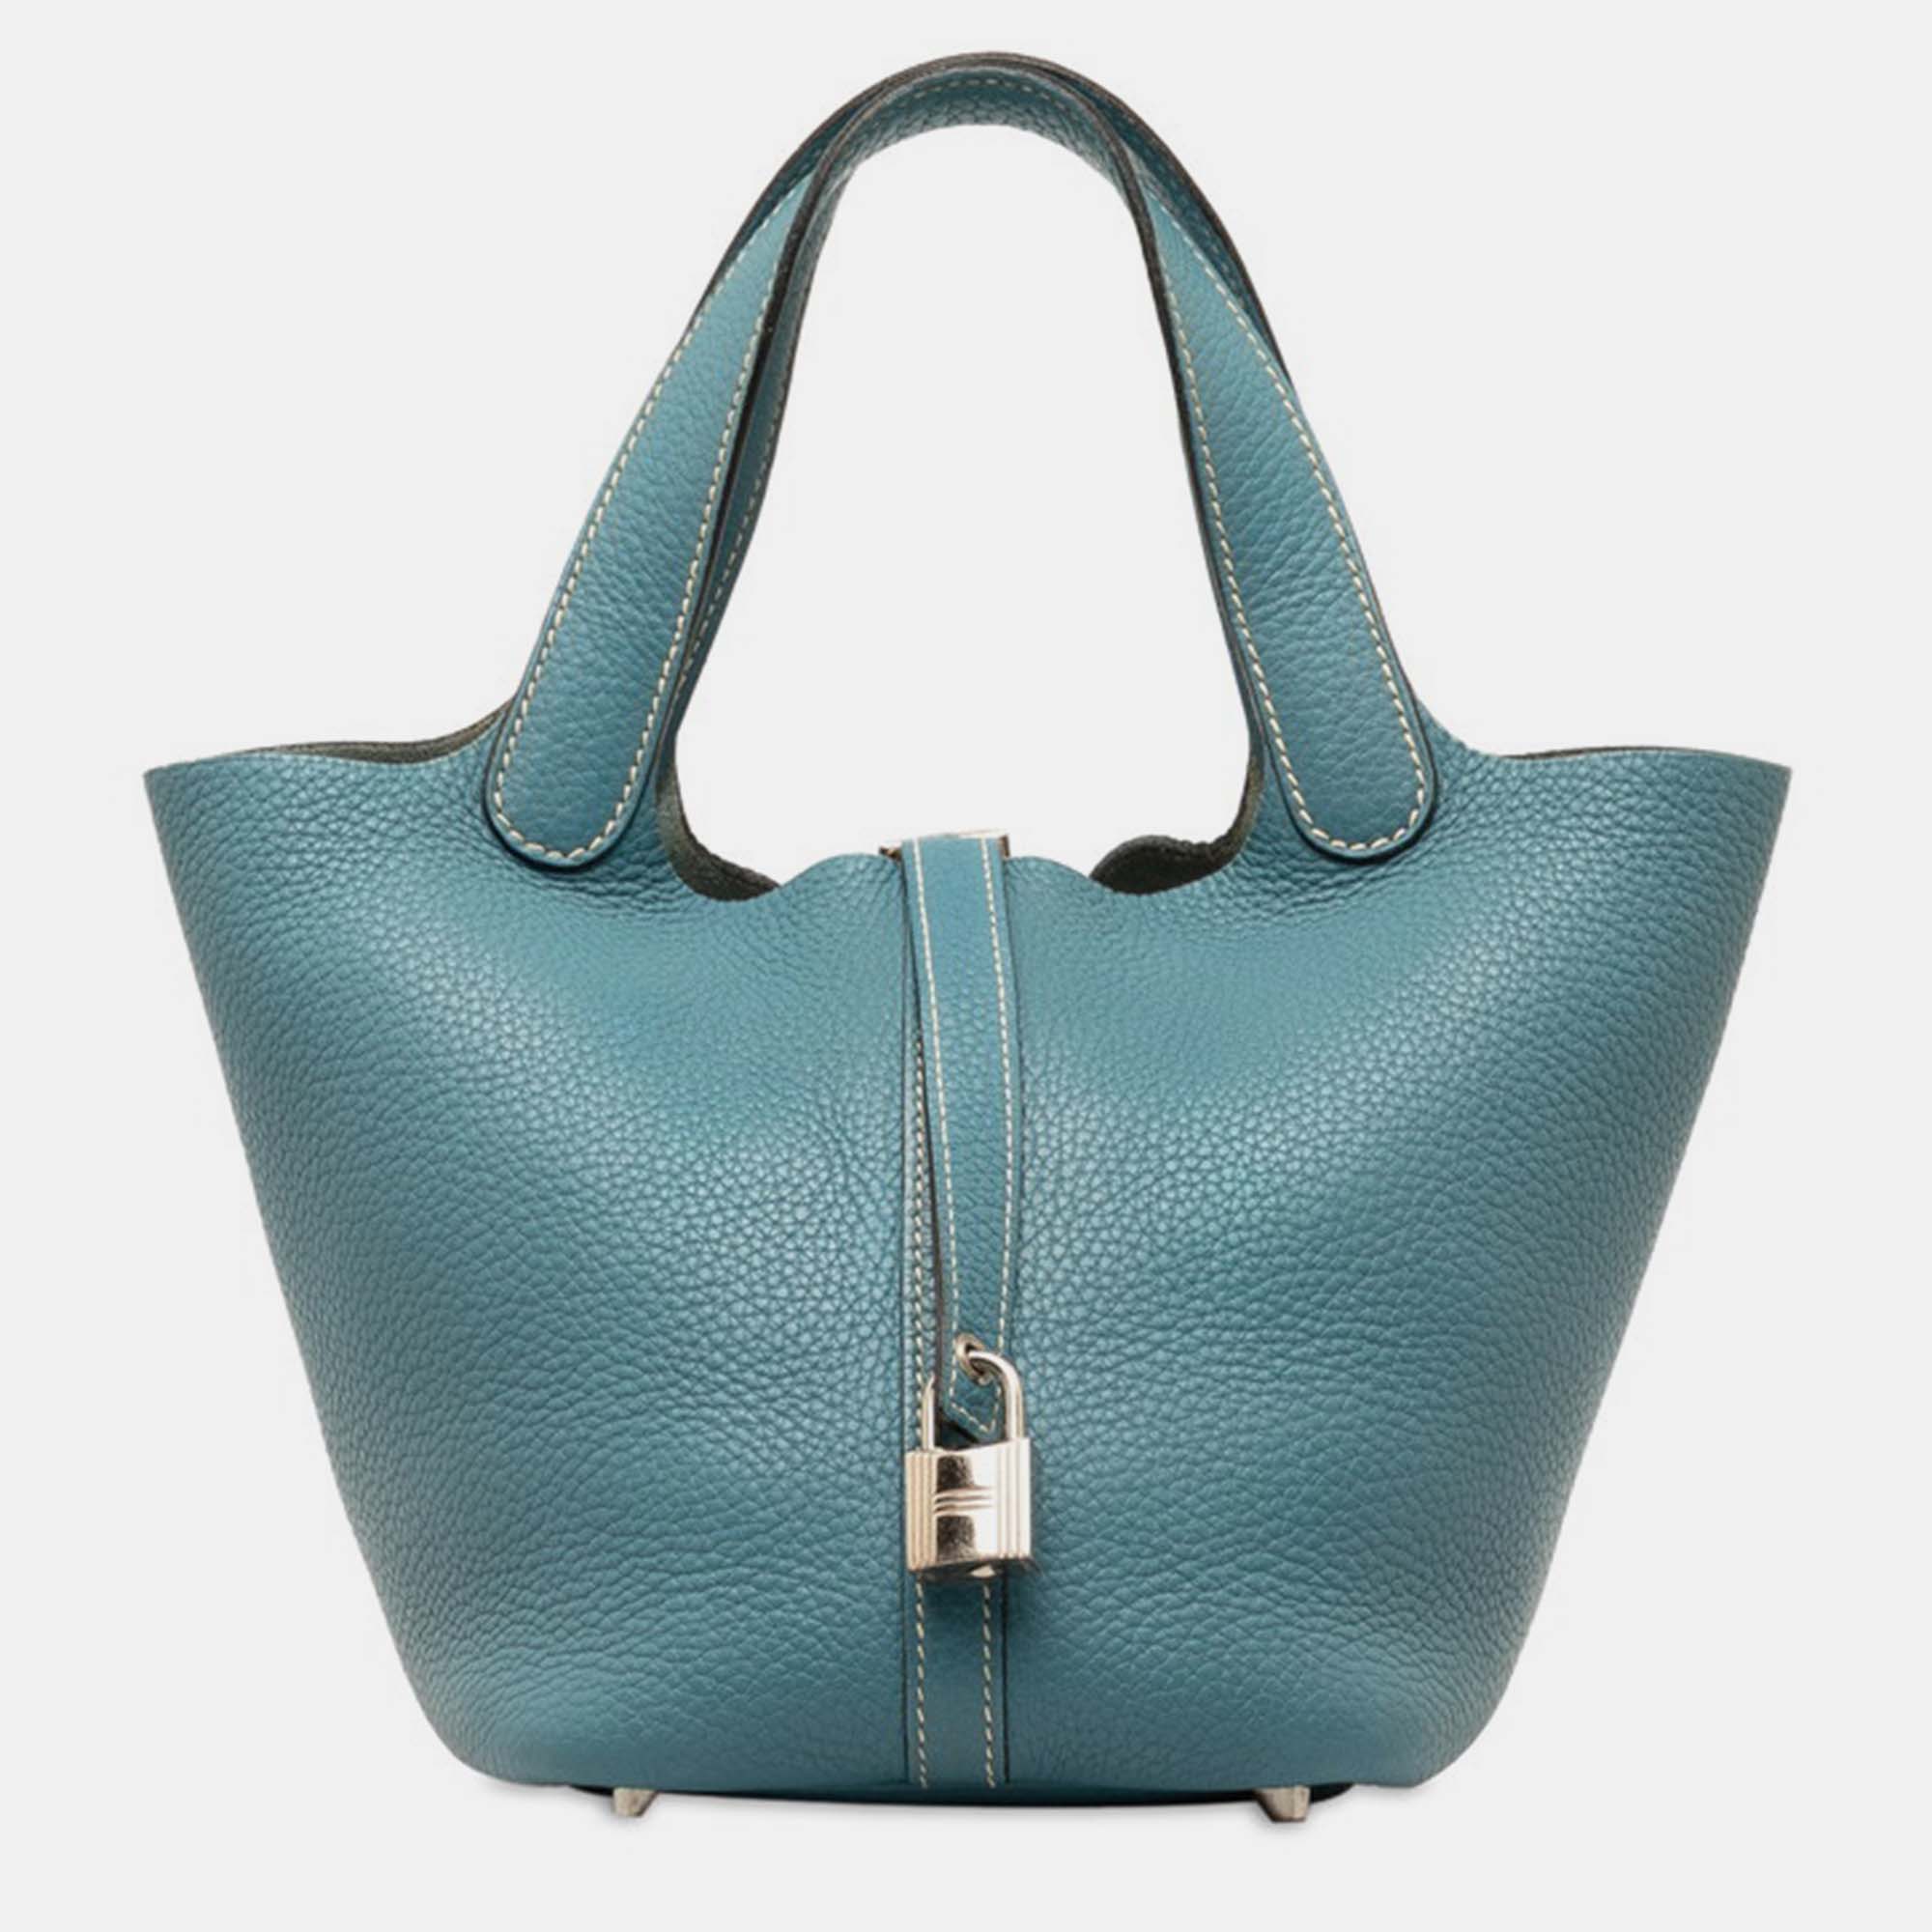 Hermes blue leather clemence picotin lock 18 bag